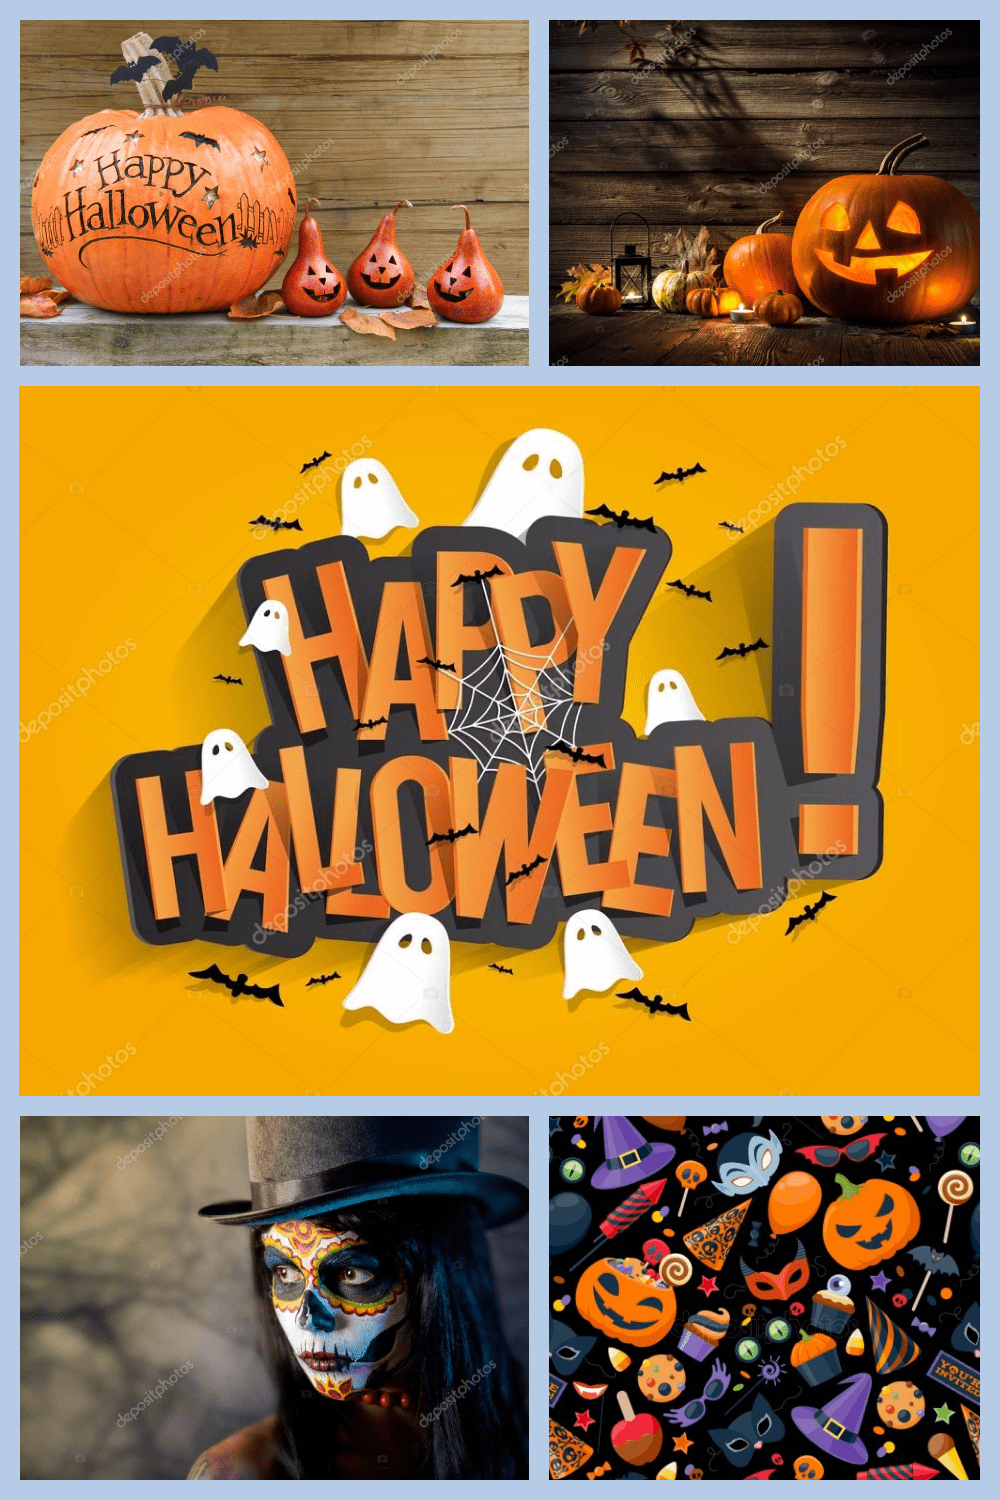 High quality and stylish Halloween images.